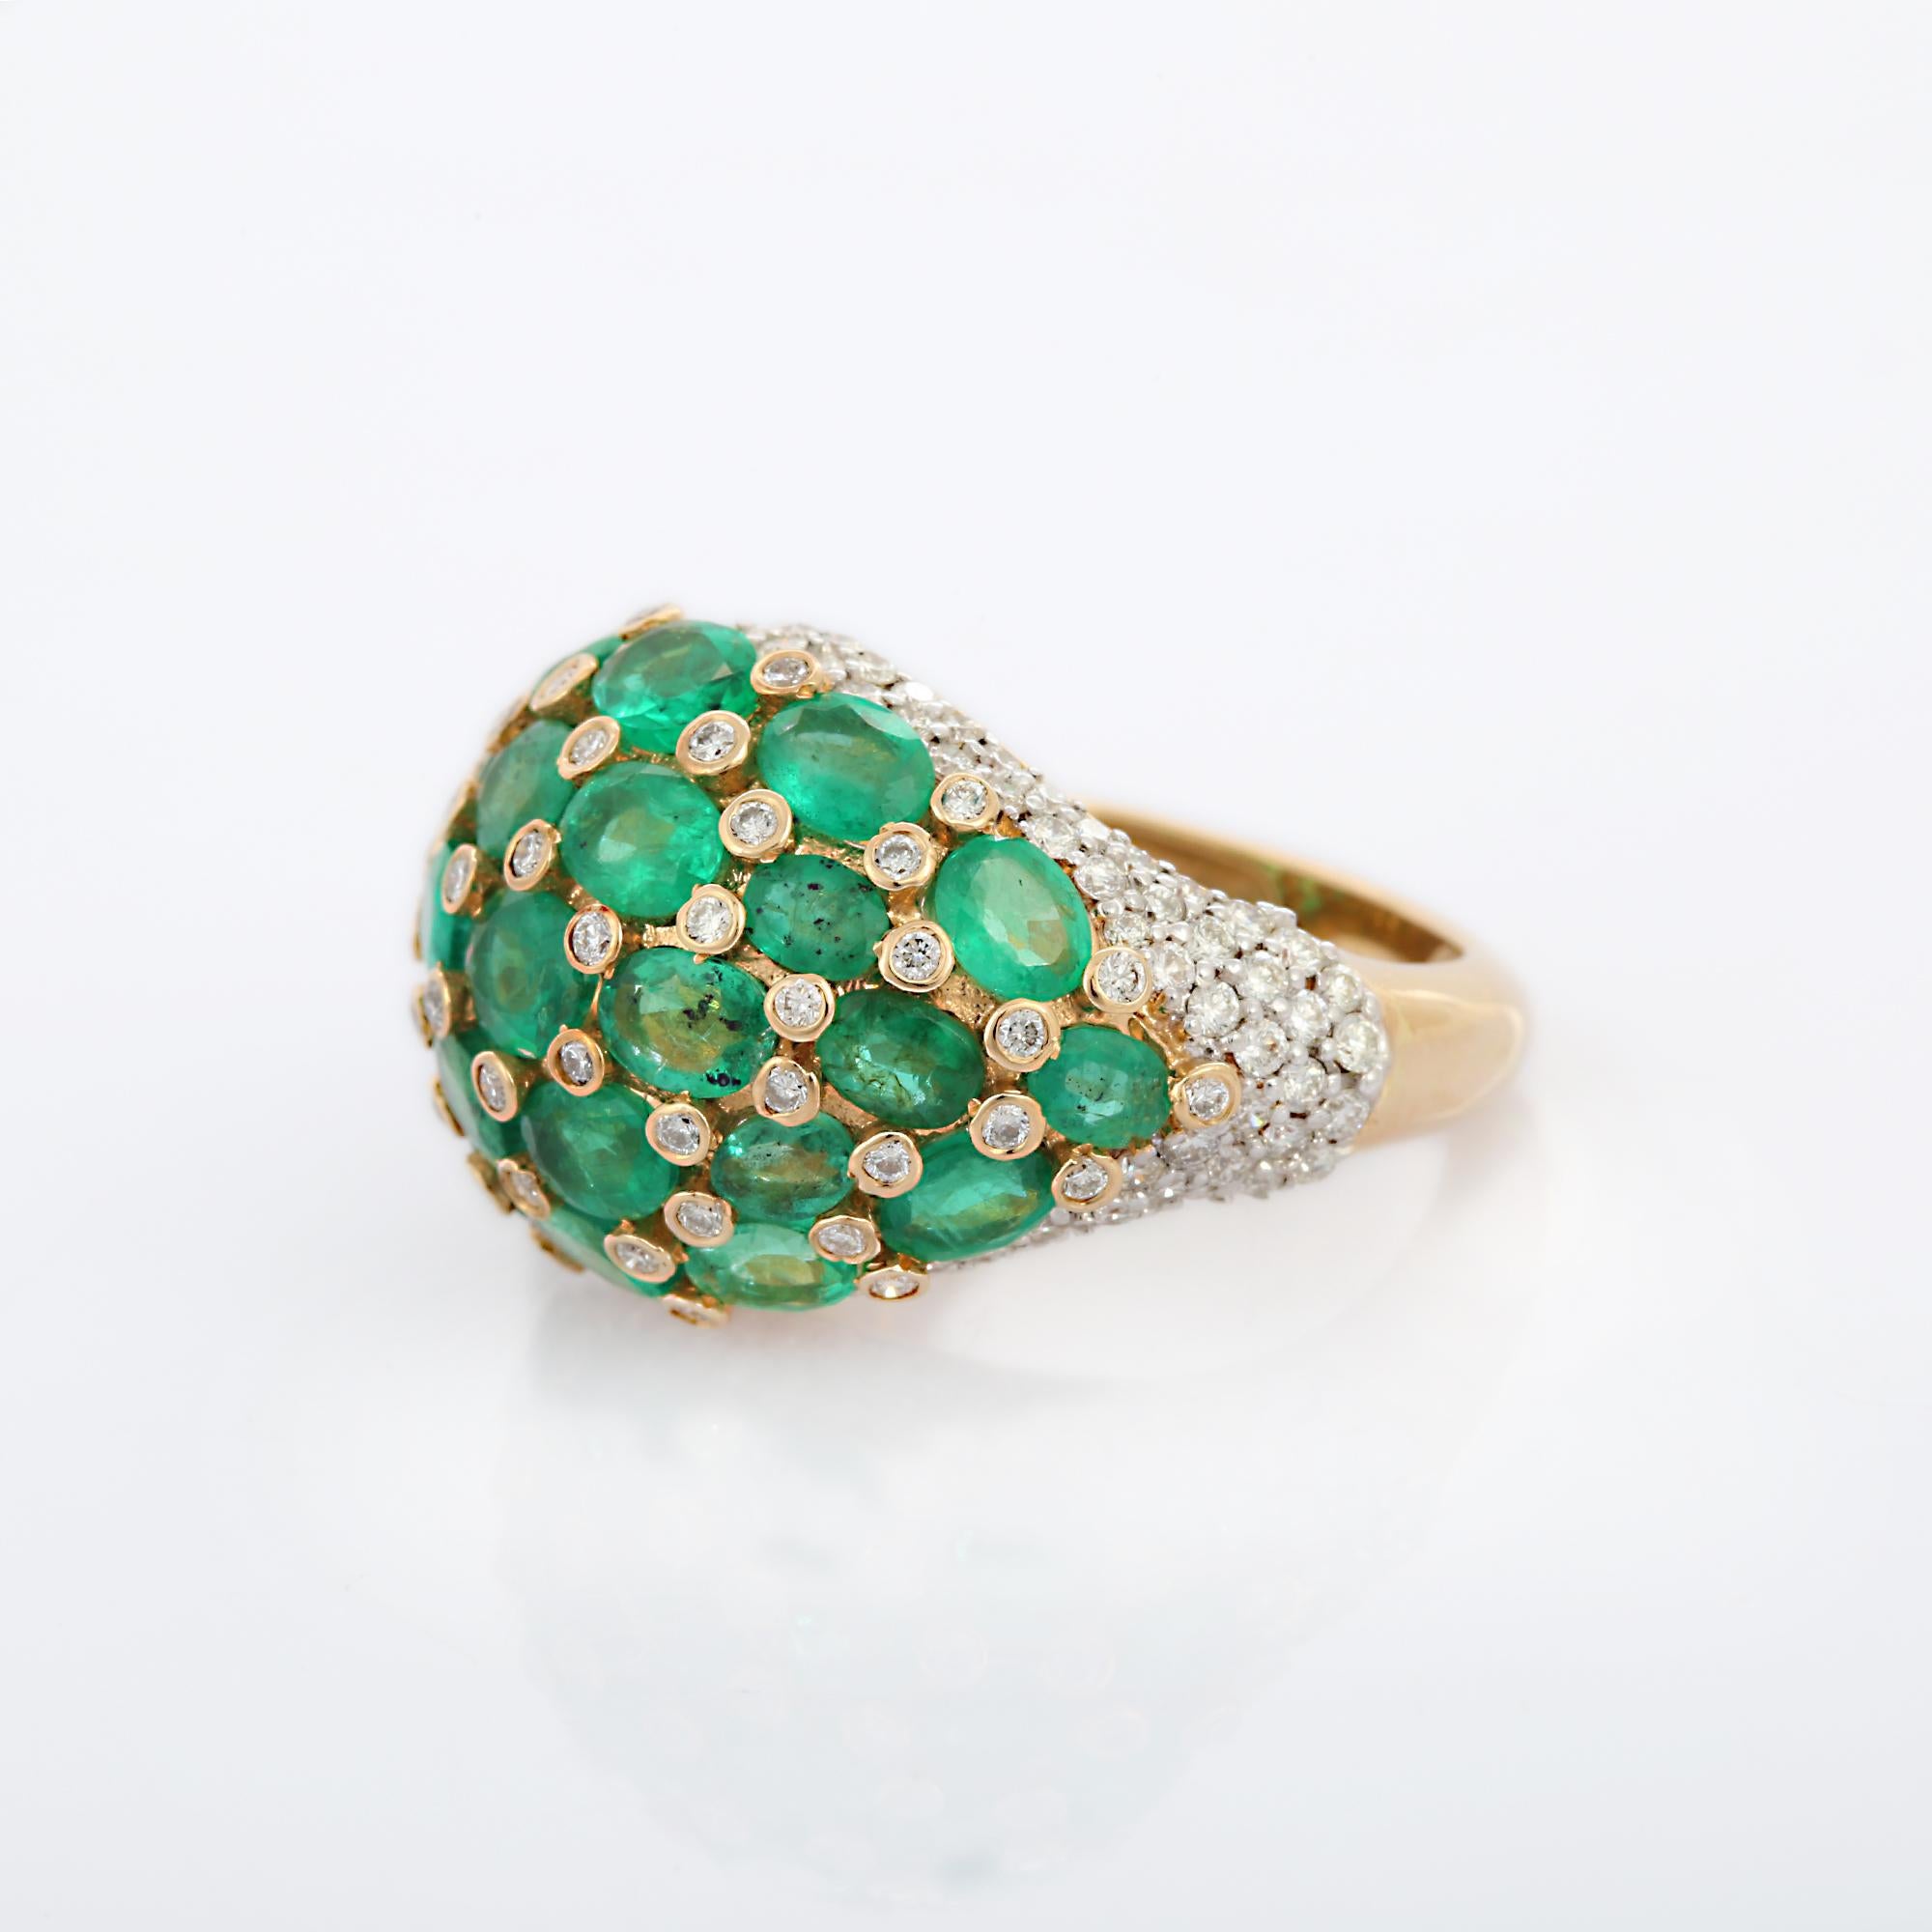 For Sale:  18k Solid Yellow Gold Emerald Diamond Cocktail Ring, Statement Emerald Ring 4